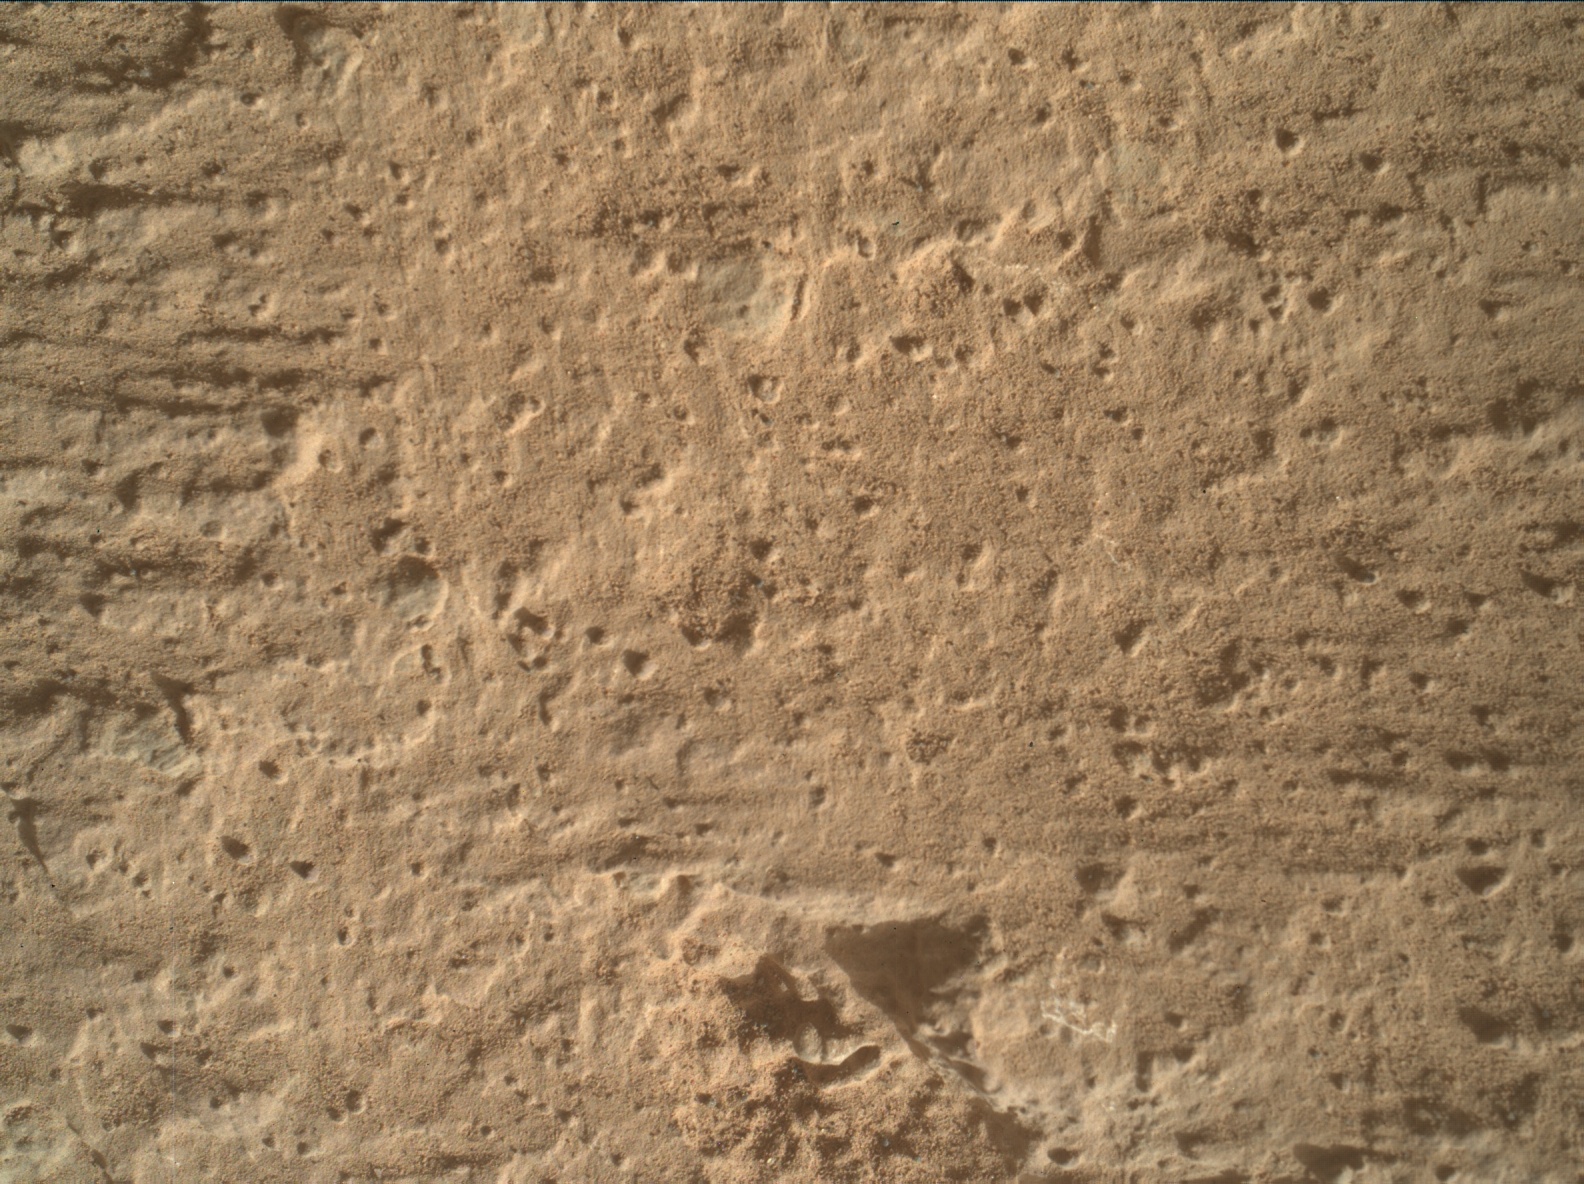 Nasa's Mars rover Curiosity acquired this image using its Mars Hand Lens Imager (MAHLI) on Sol 3194